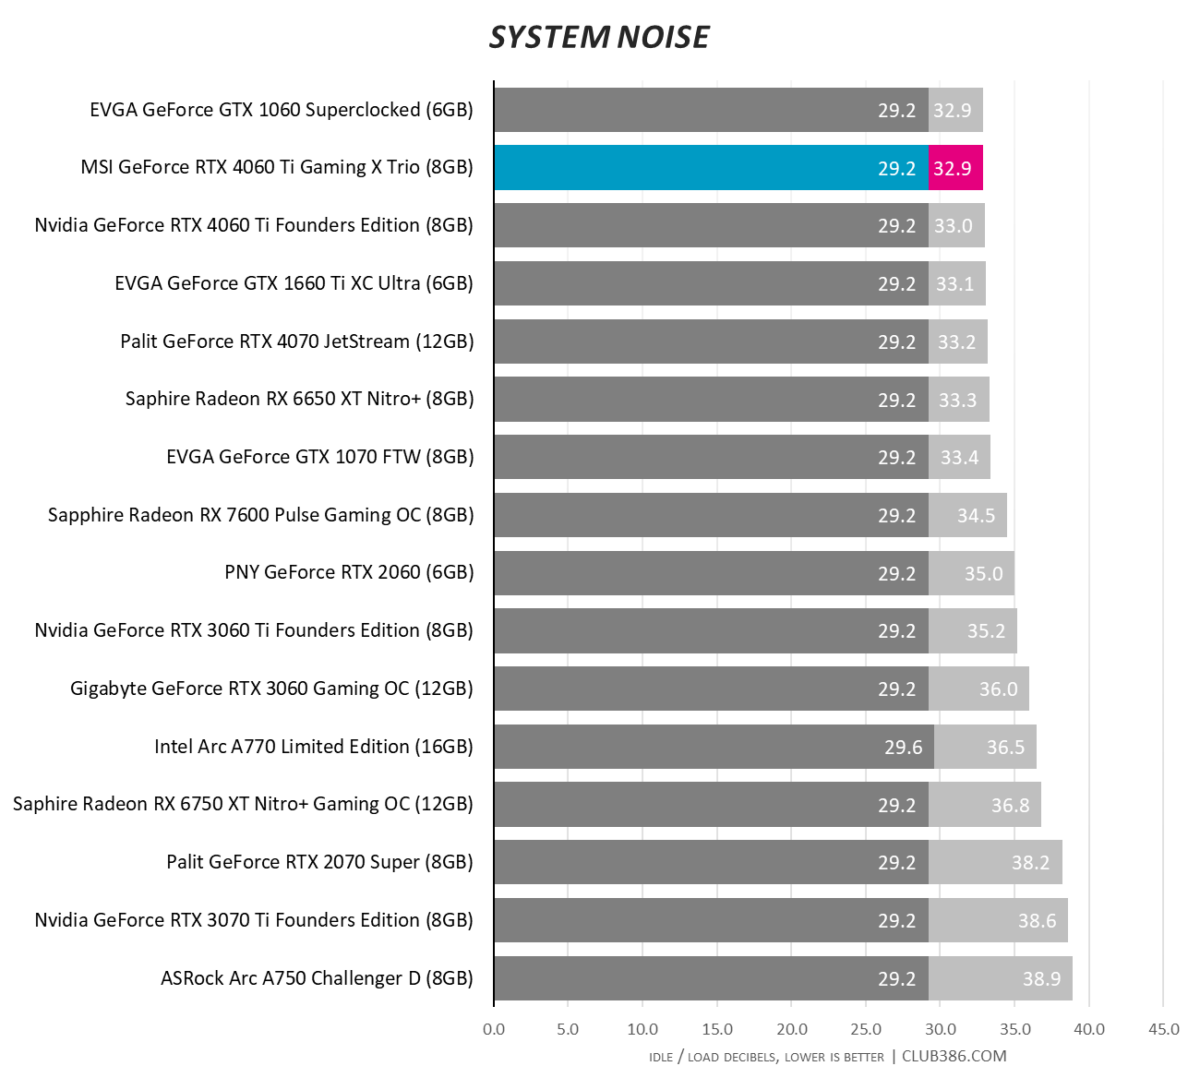 MSI GeForce RTX 4060 Ti Gaming X Trio - System Noise